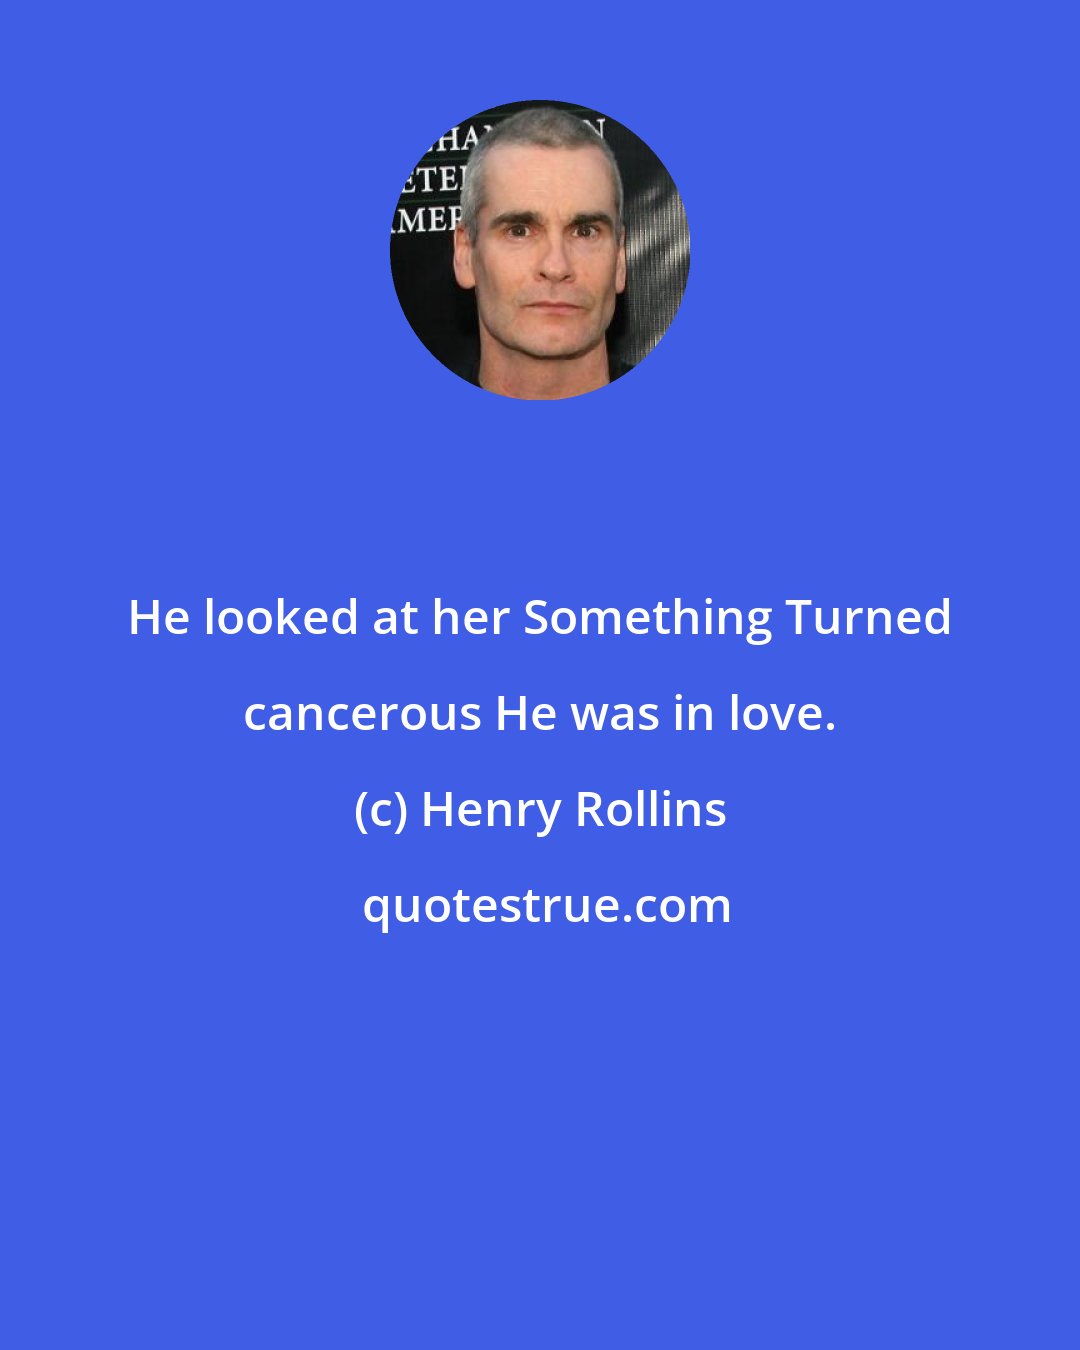 Henry Rollins: He looked at her Something Turned cancerous He was in love.